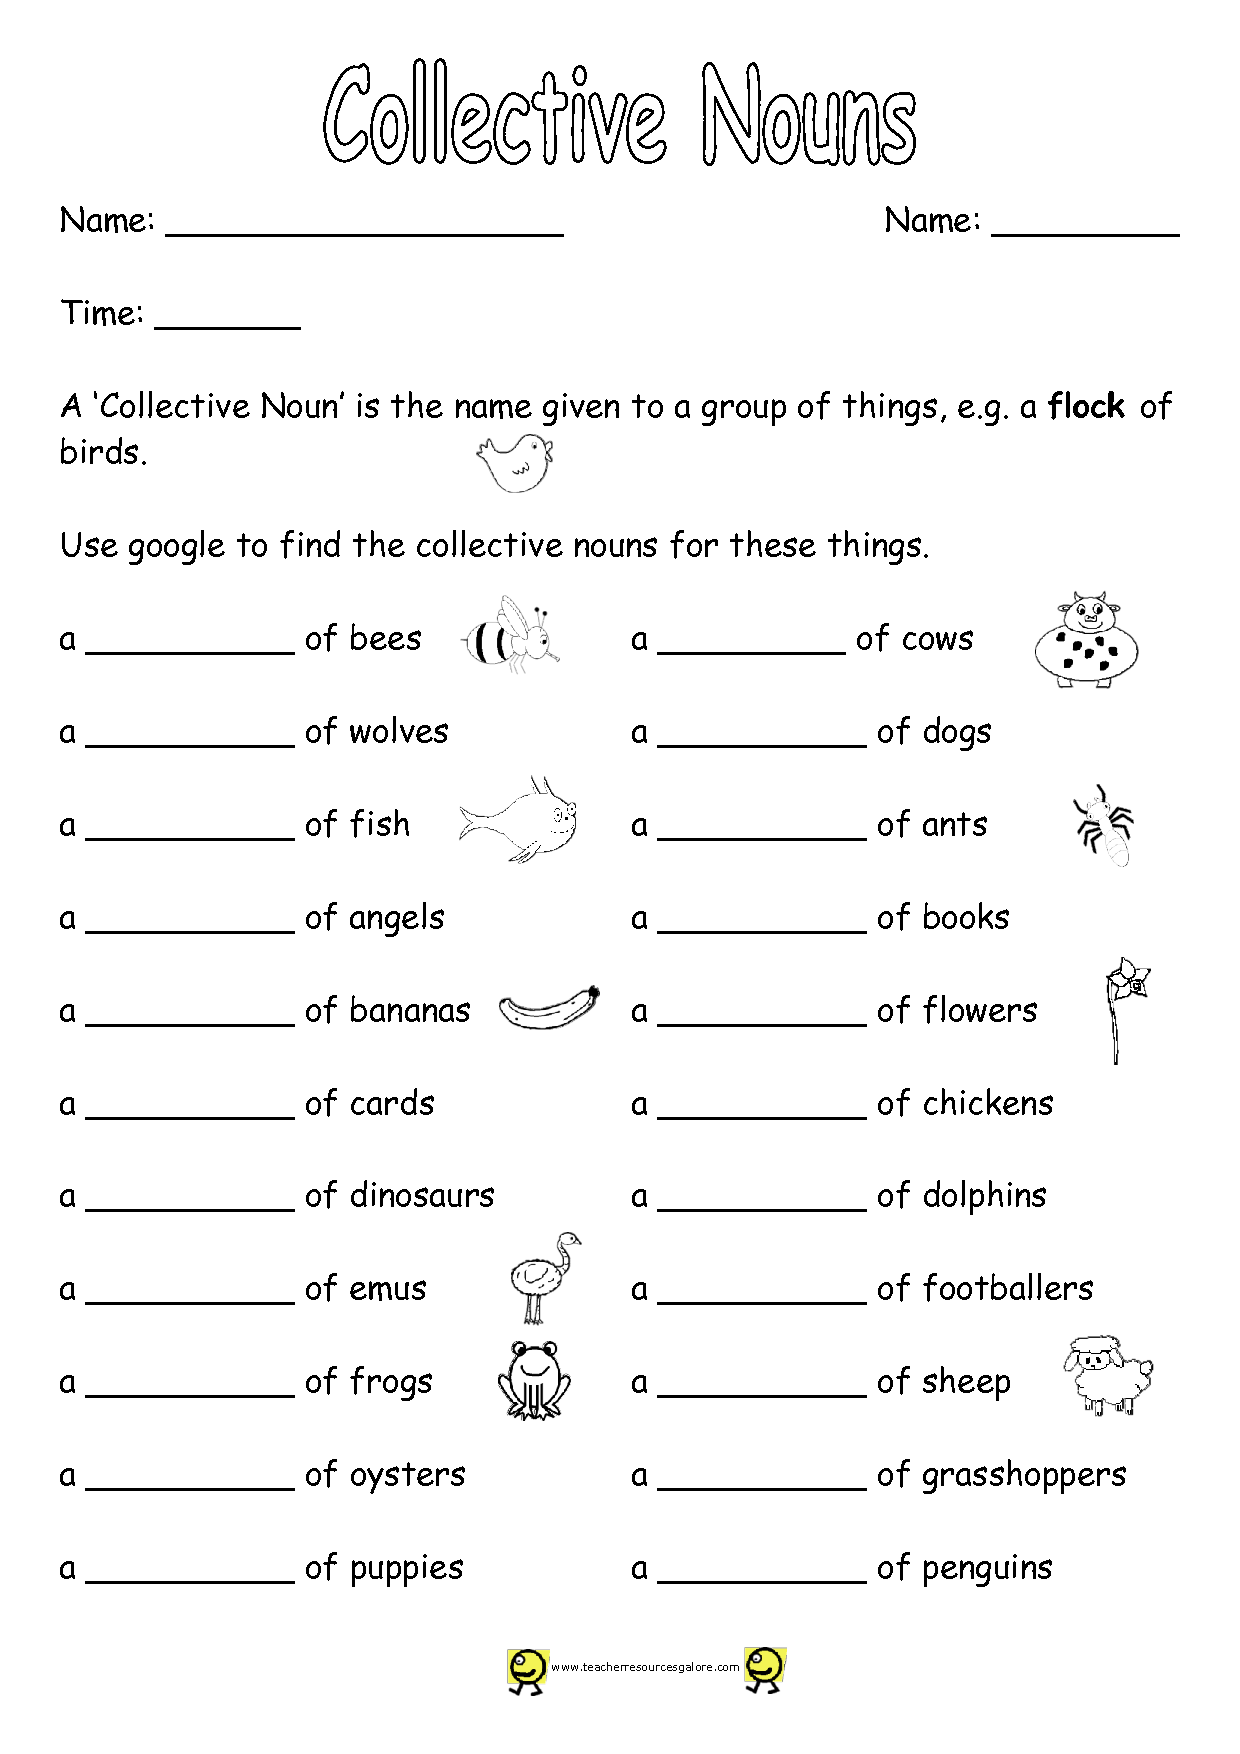 Collective Nouns Worksheet With Answers Pdf Grade 5